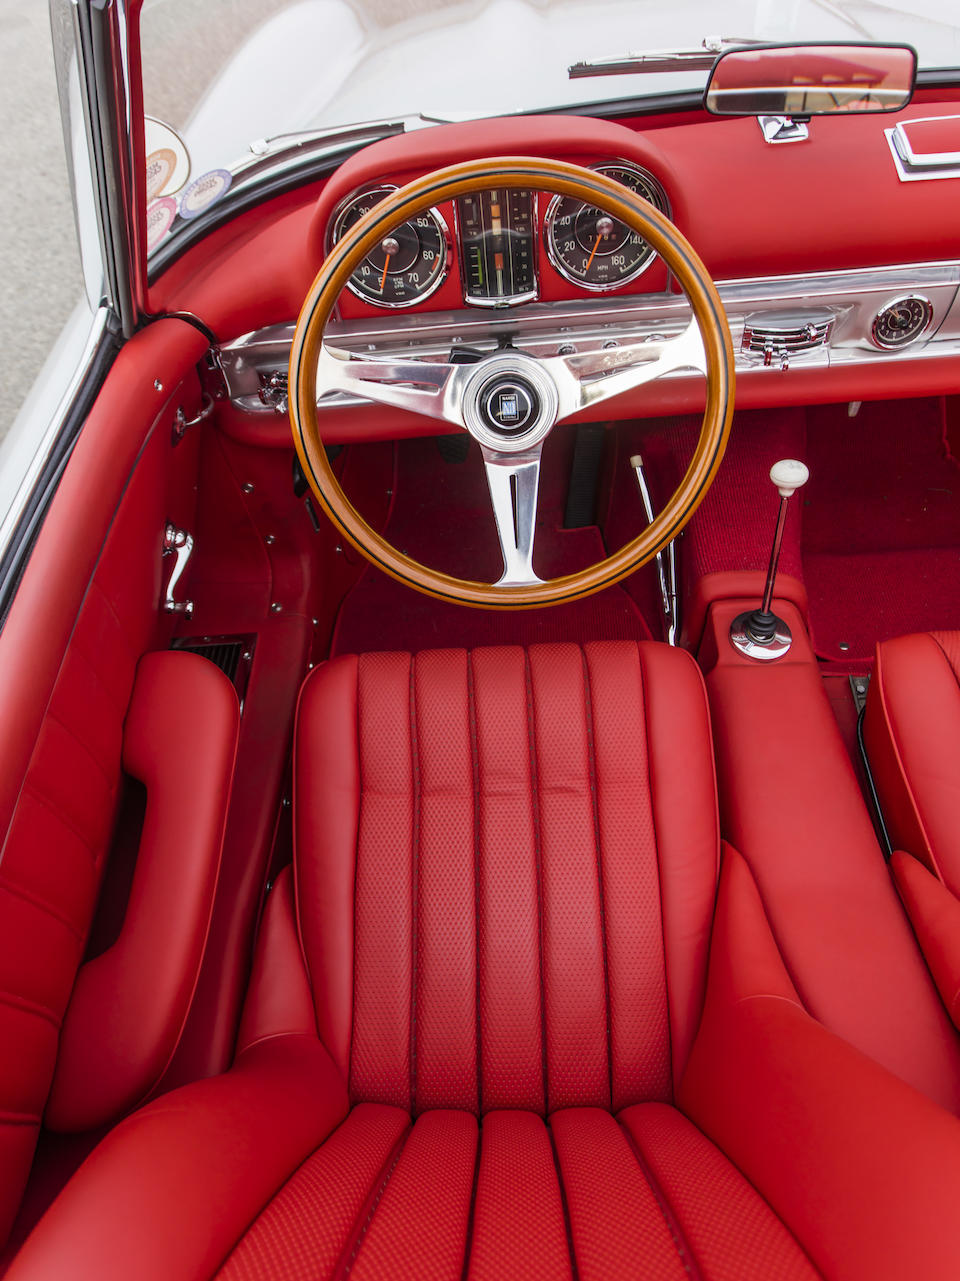 <b>1957 Mercedes-Benz 300SL Roadster</b><br />Chassis no. 198.042.7500532<br />Engine no. 198.980.7500431